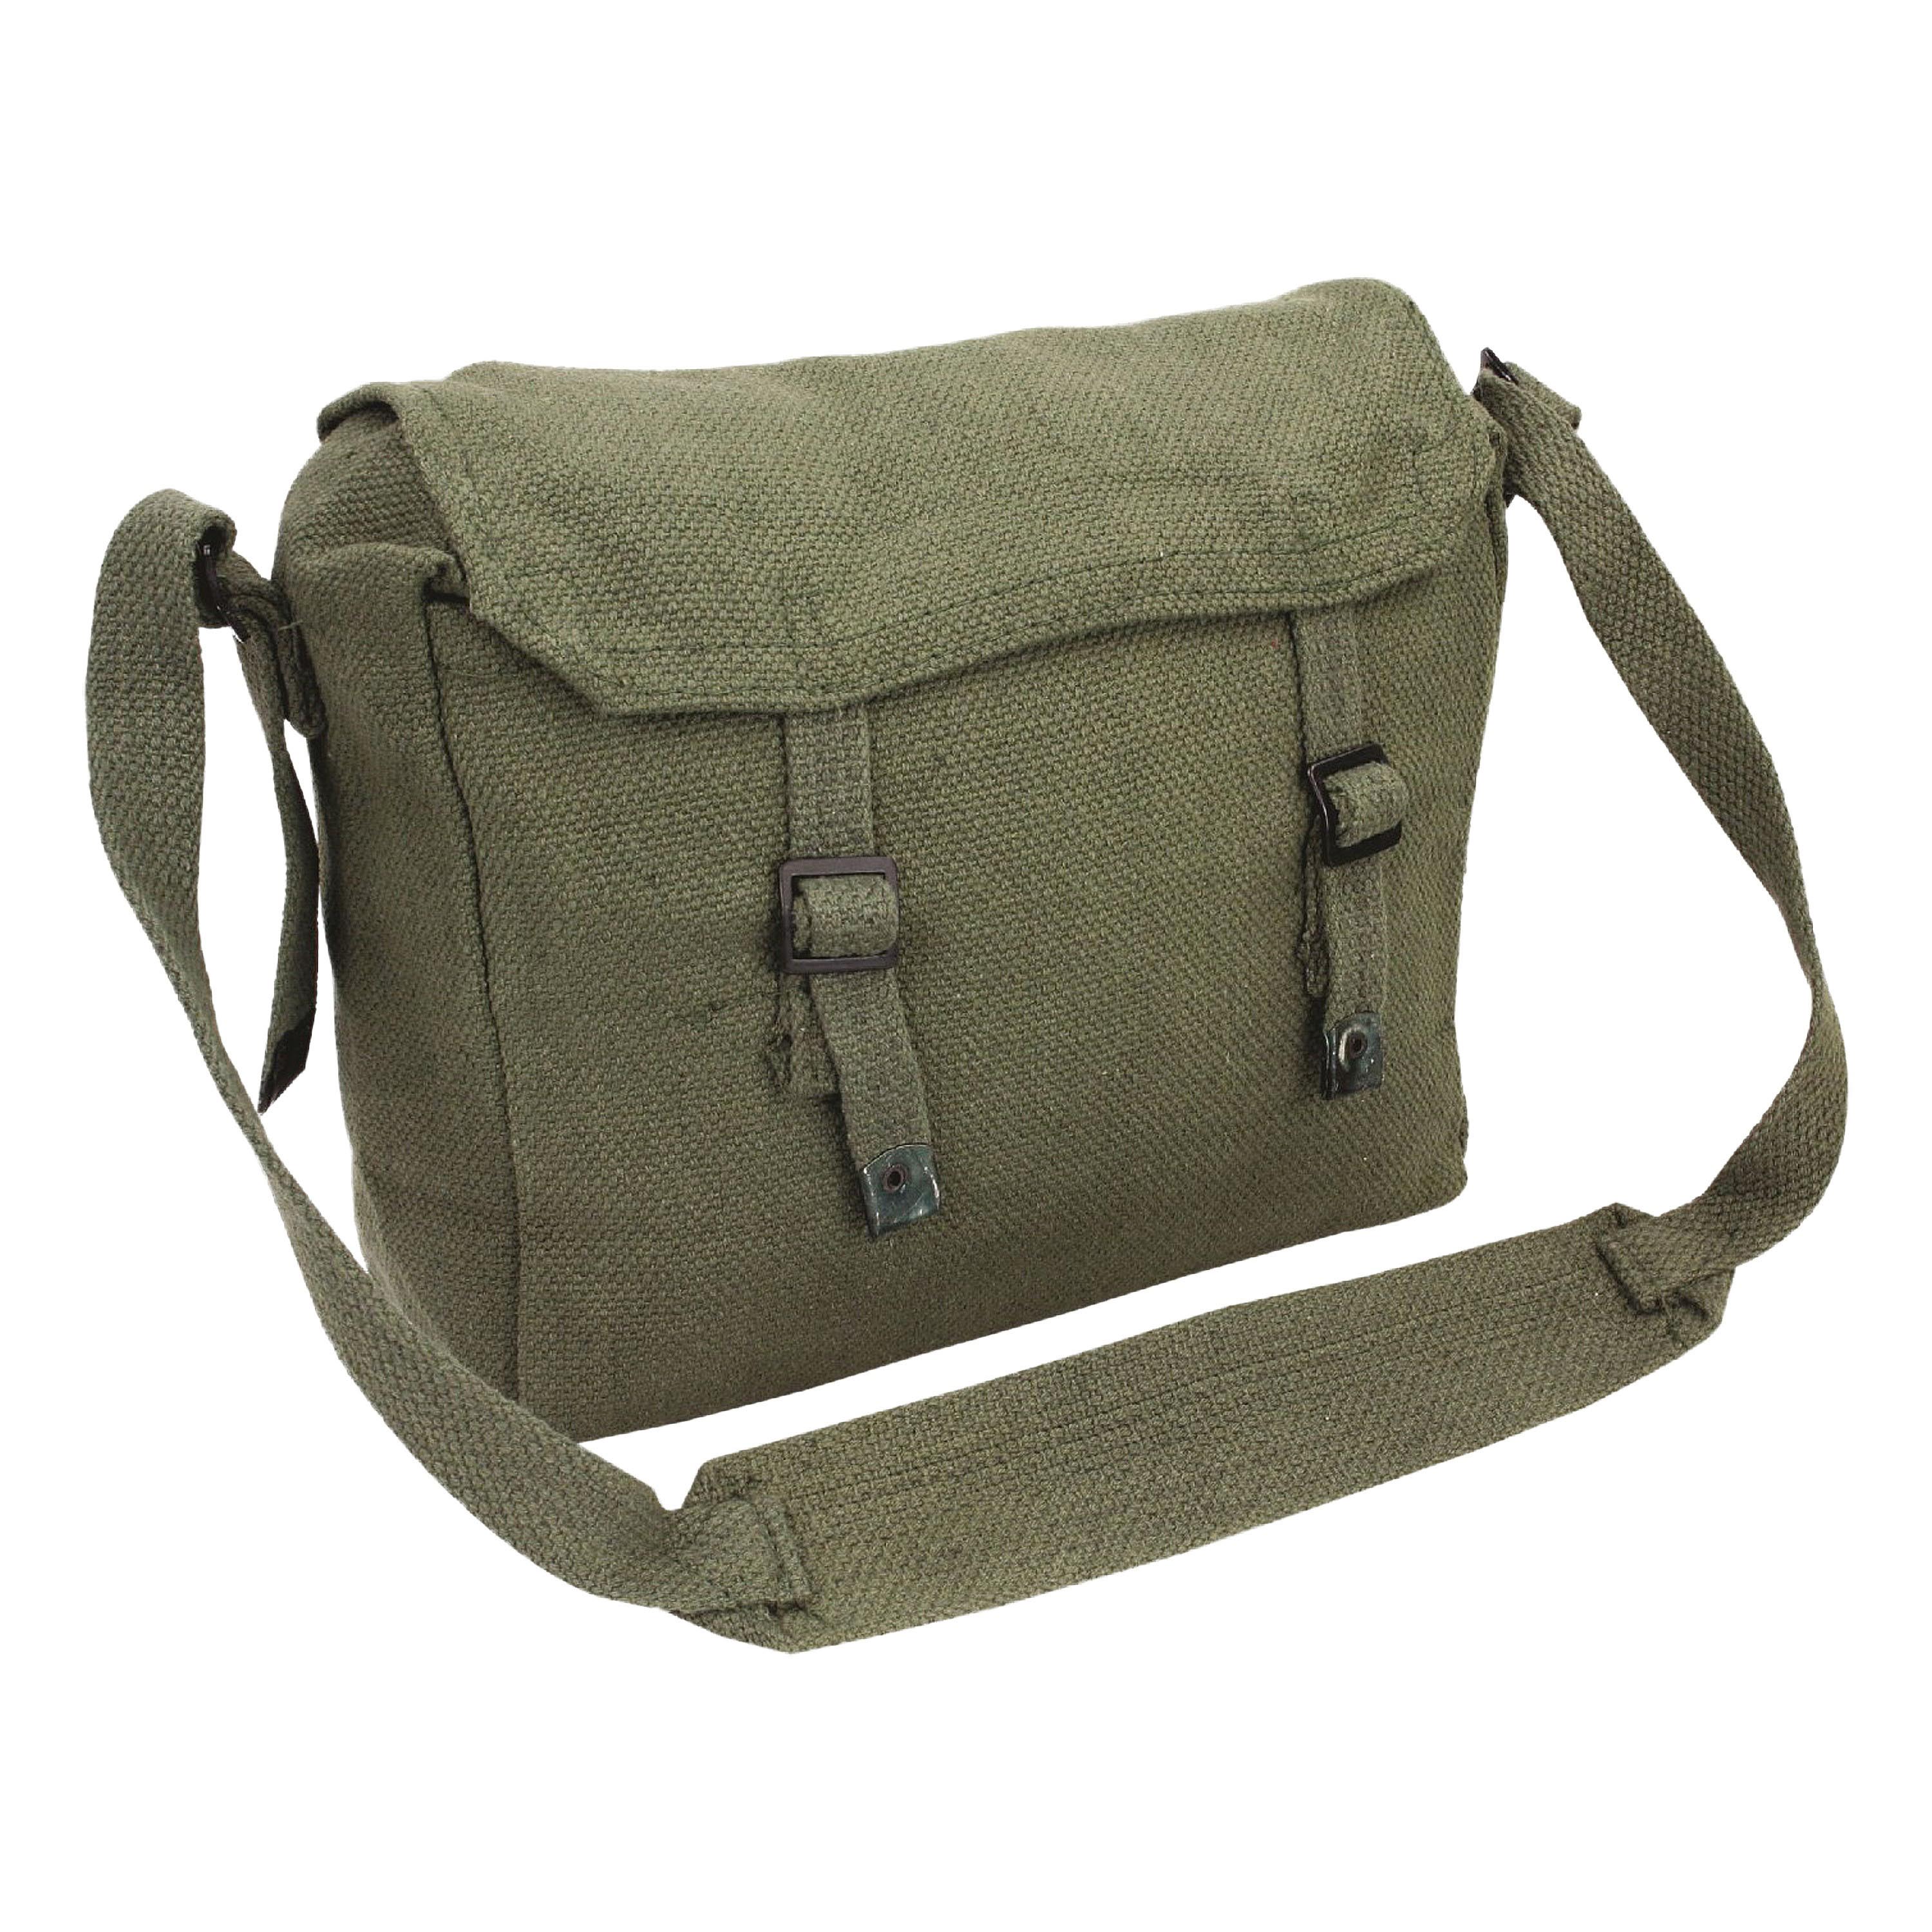 Highlander Provisions Pouch Webbing olive | Highlander Provisions Pouch ...